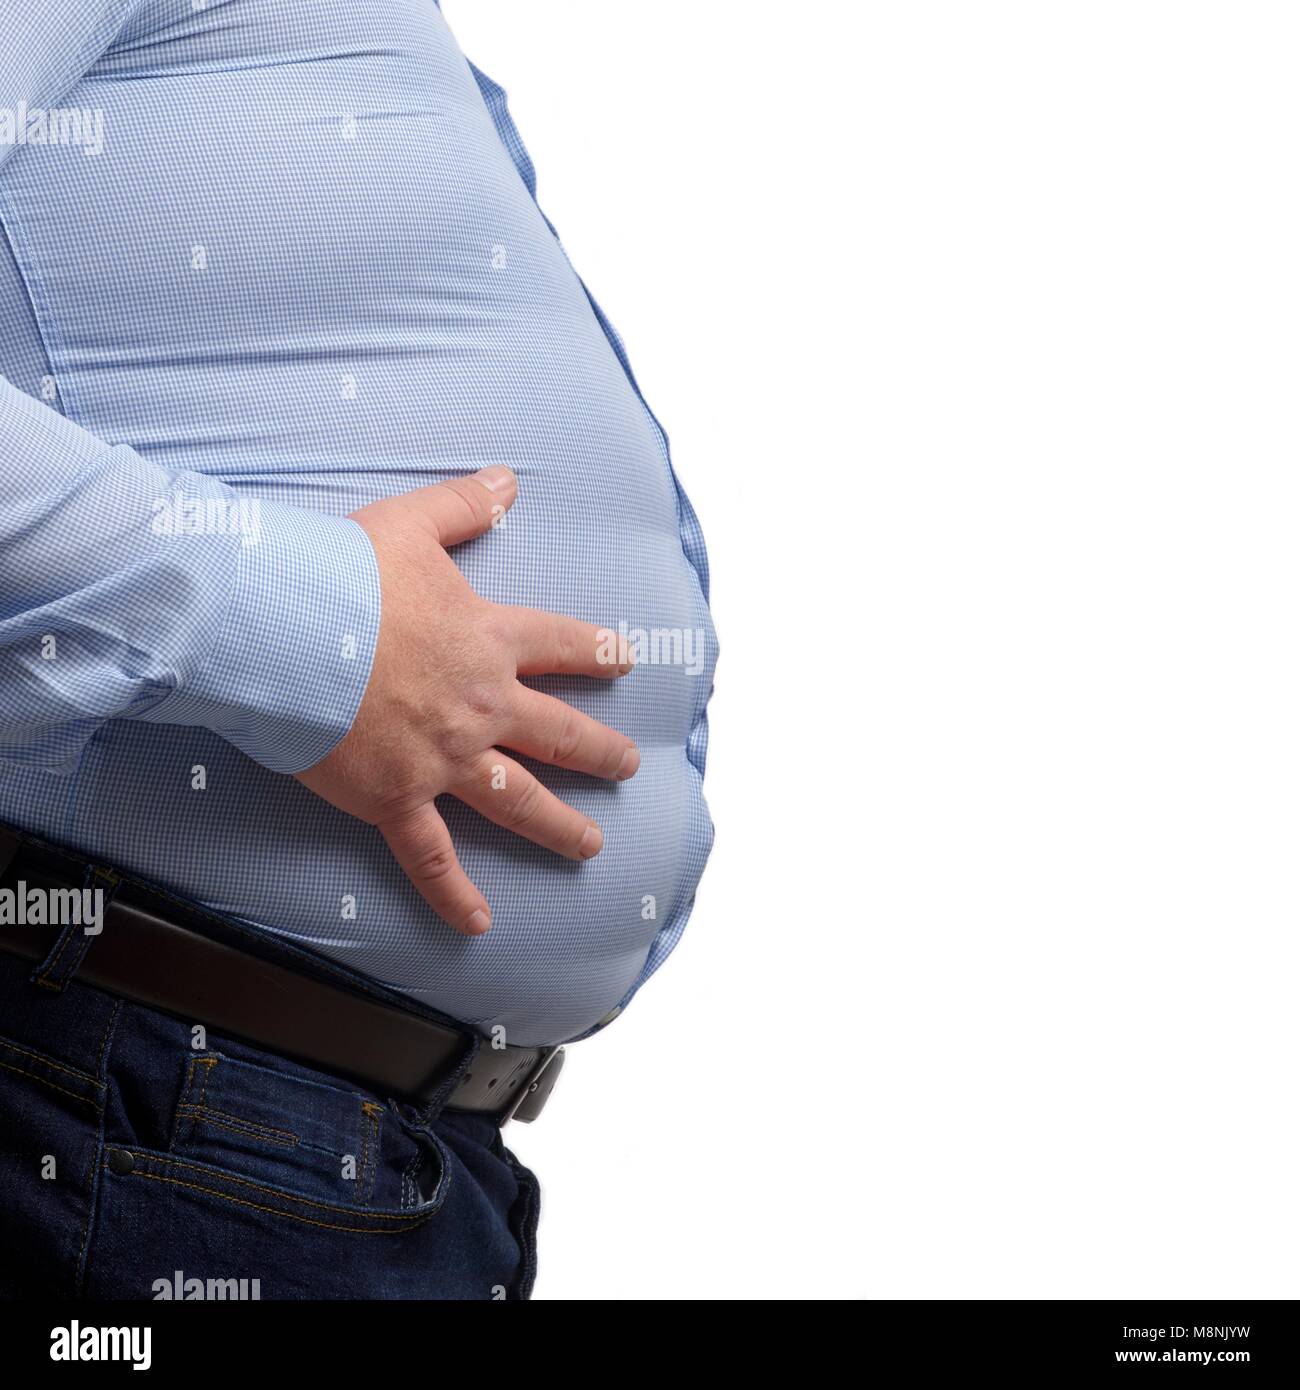 Overweight man with hands on his stomach, side view. Stock Photo